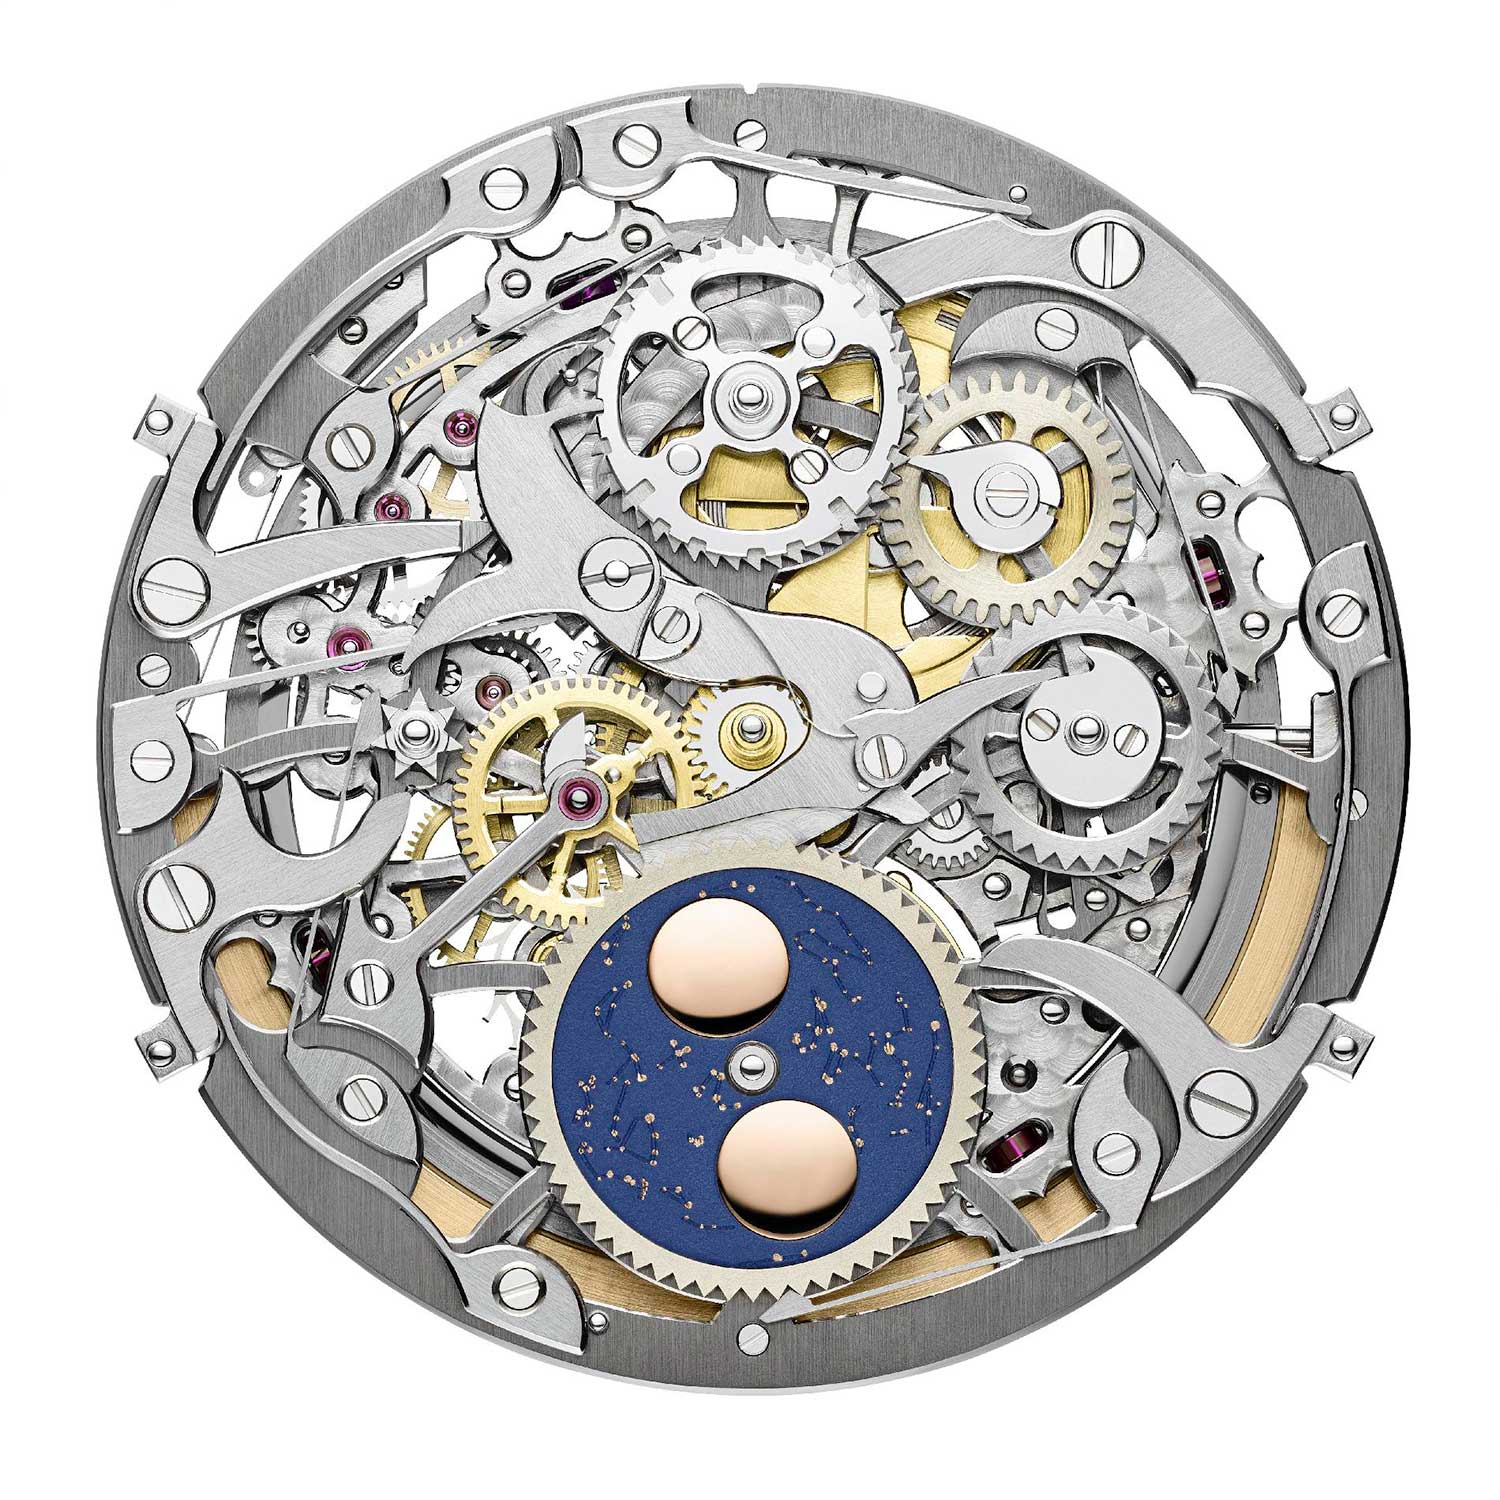 21.6mm diameter, 4.05mm thick; uncased dial side view of the caliber 1120 QPSQ powering the 2020 41.5mm Overseas Perpetual Calendar Ultra-Thin Skeleton ref. 4300V/120R-B547